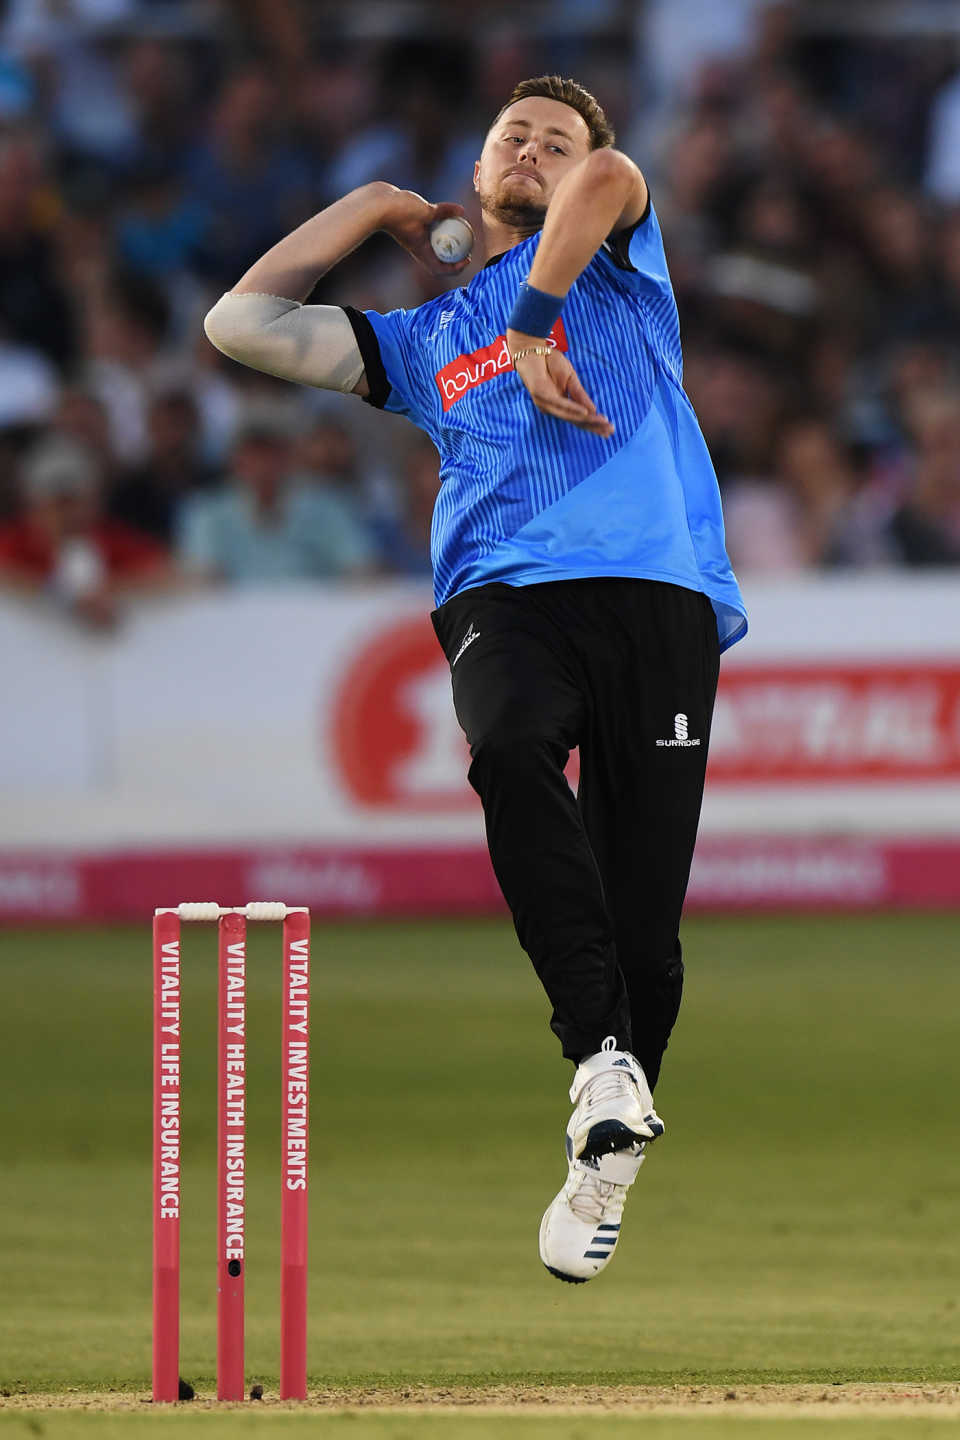 Ollie Robinson in his delivery stride, Sussex v Hampshire, Vitality Blast, Hove, July 24, 2019